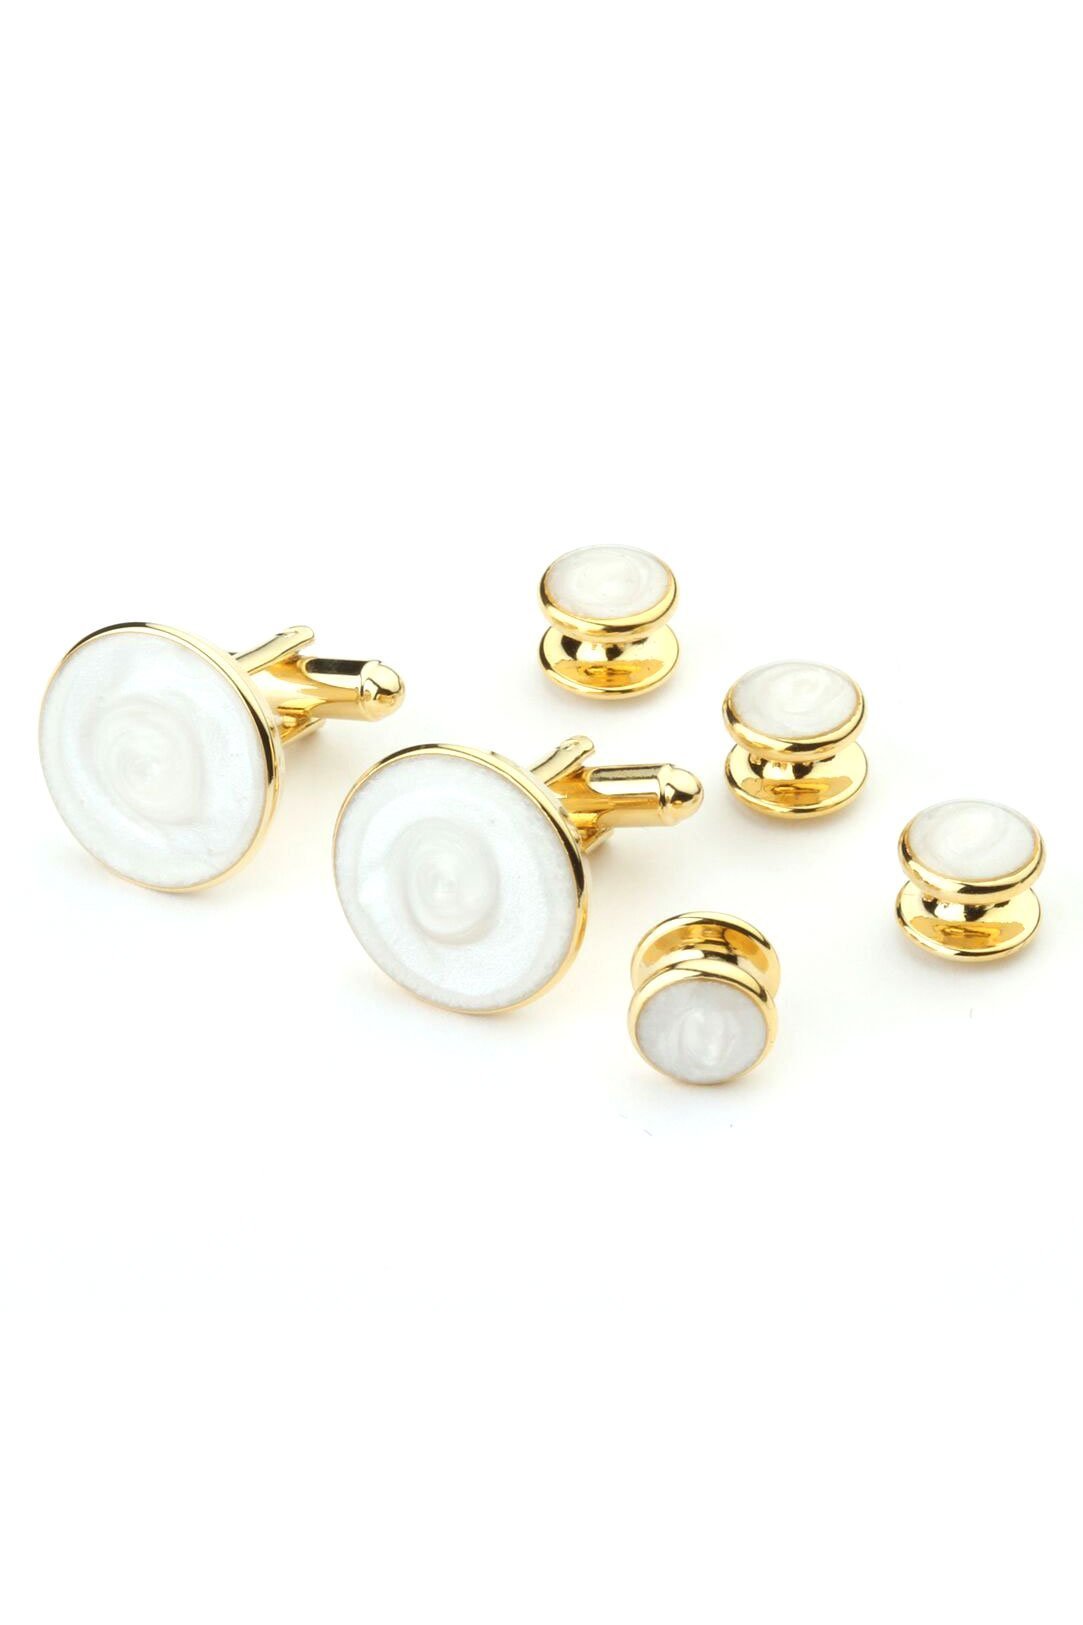 Mother of Pearl with Gold Trim Studs and Cufflinks Set - Set